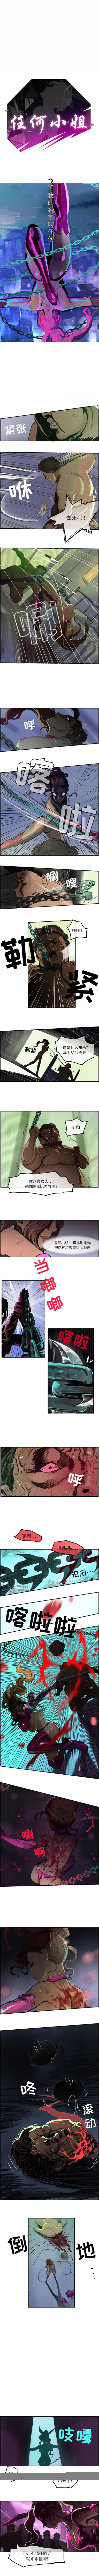 Cum Swallowing 任何小姐 1-31 Sloppy - Page 5